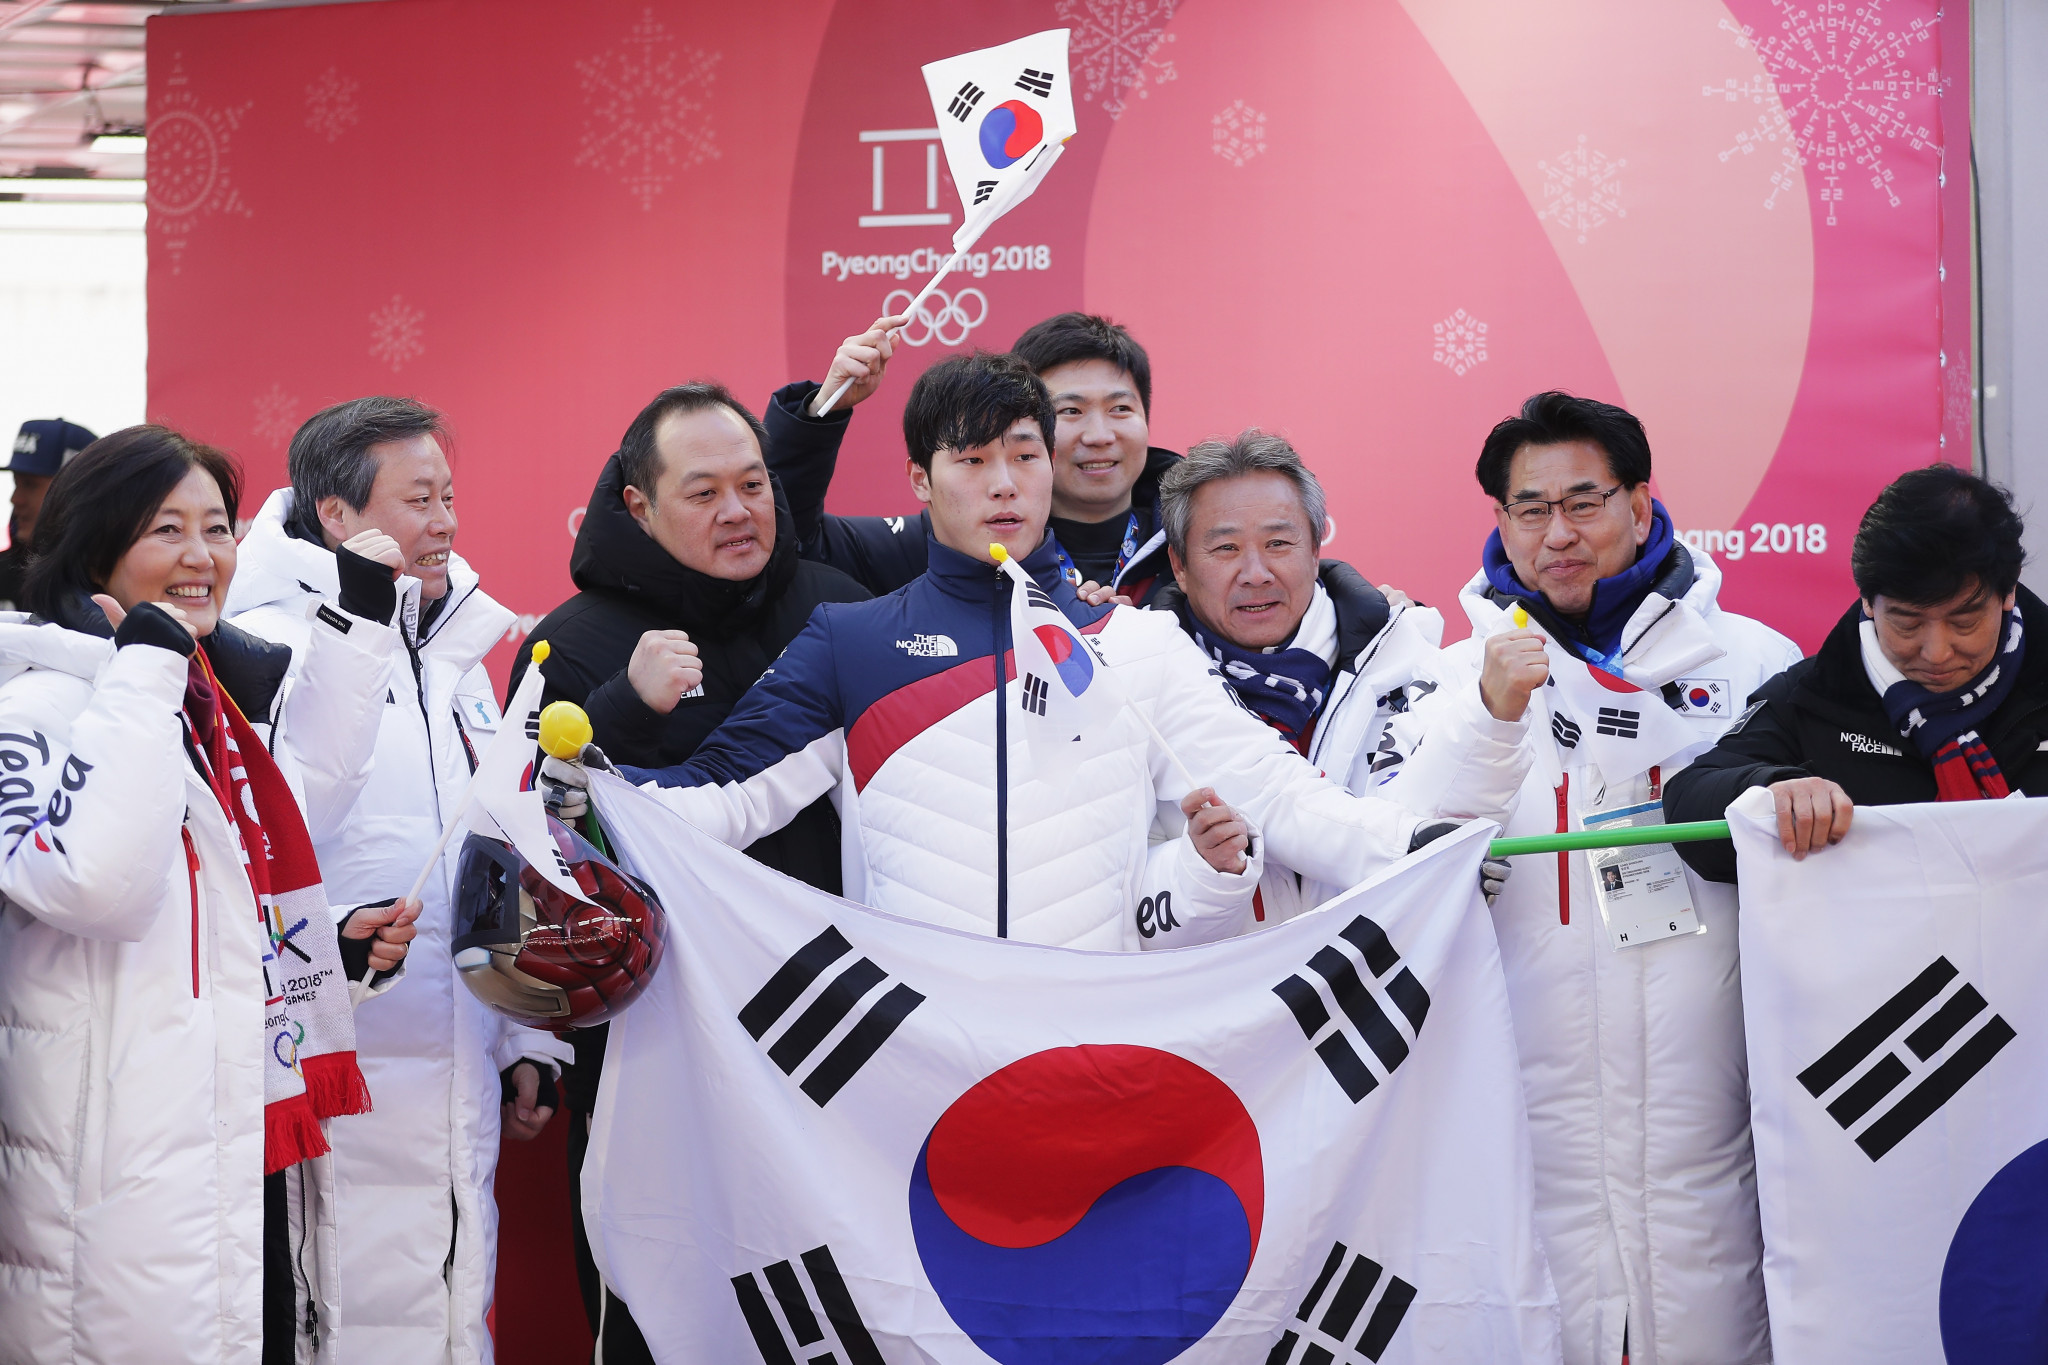 Yun Sungbin claimed hosts South Korea’s second gold medal of the 2018 Winter Olympic Games after winning the men’s skeleton event today ©Getty Images